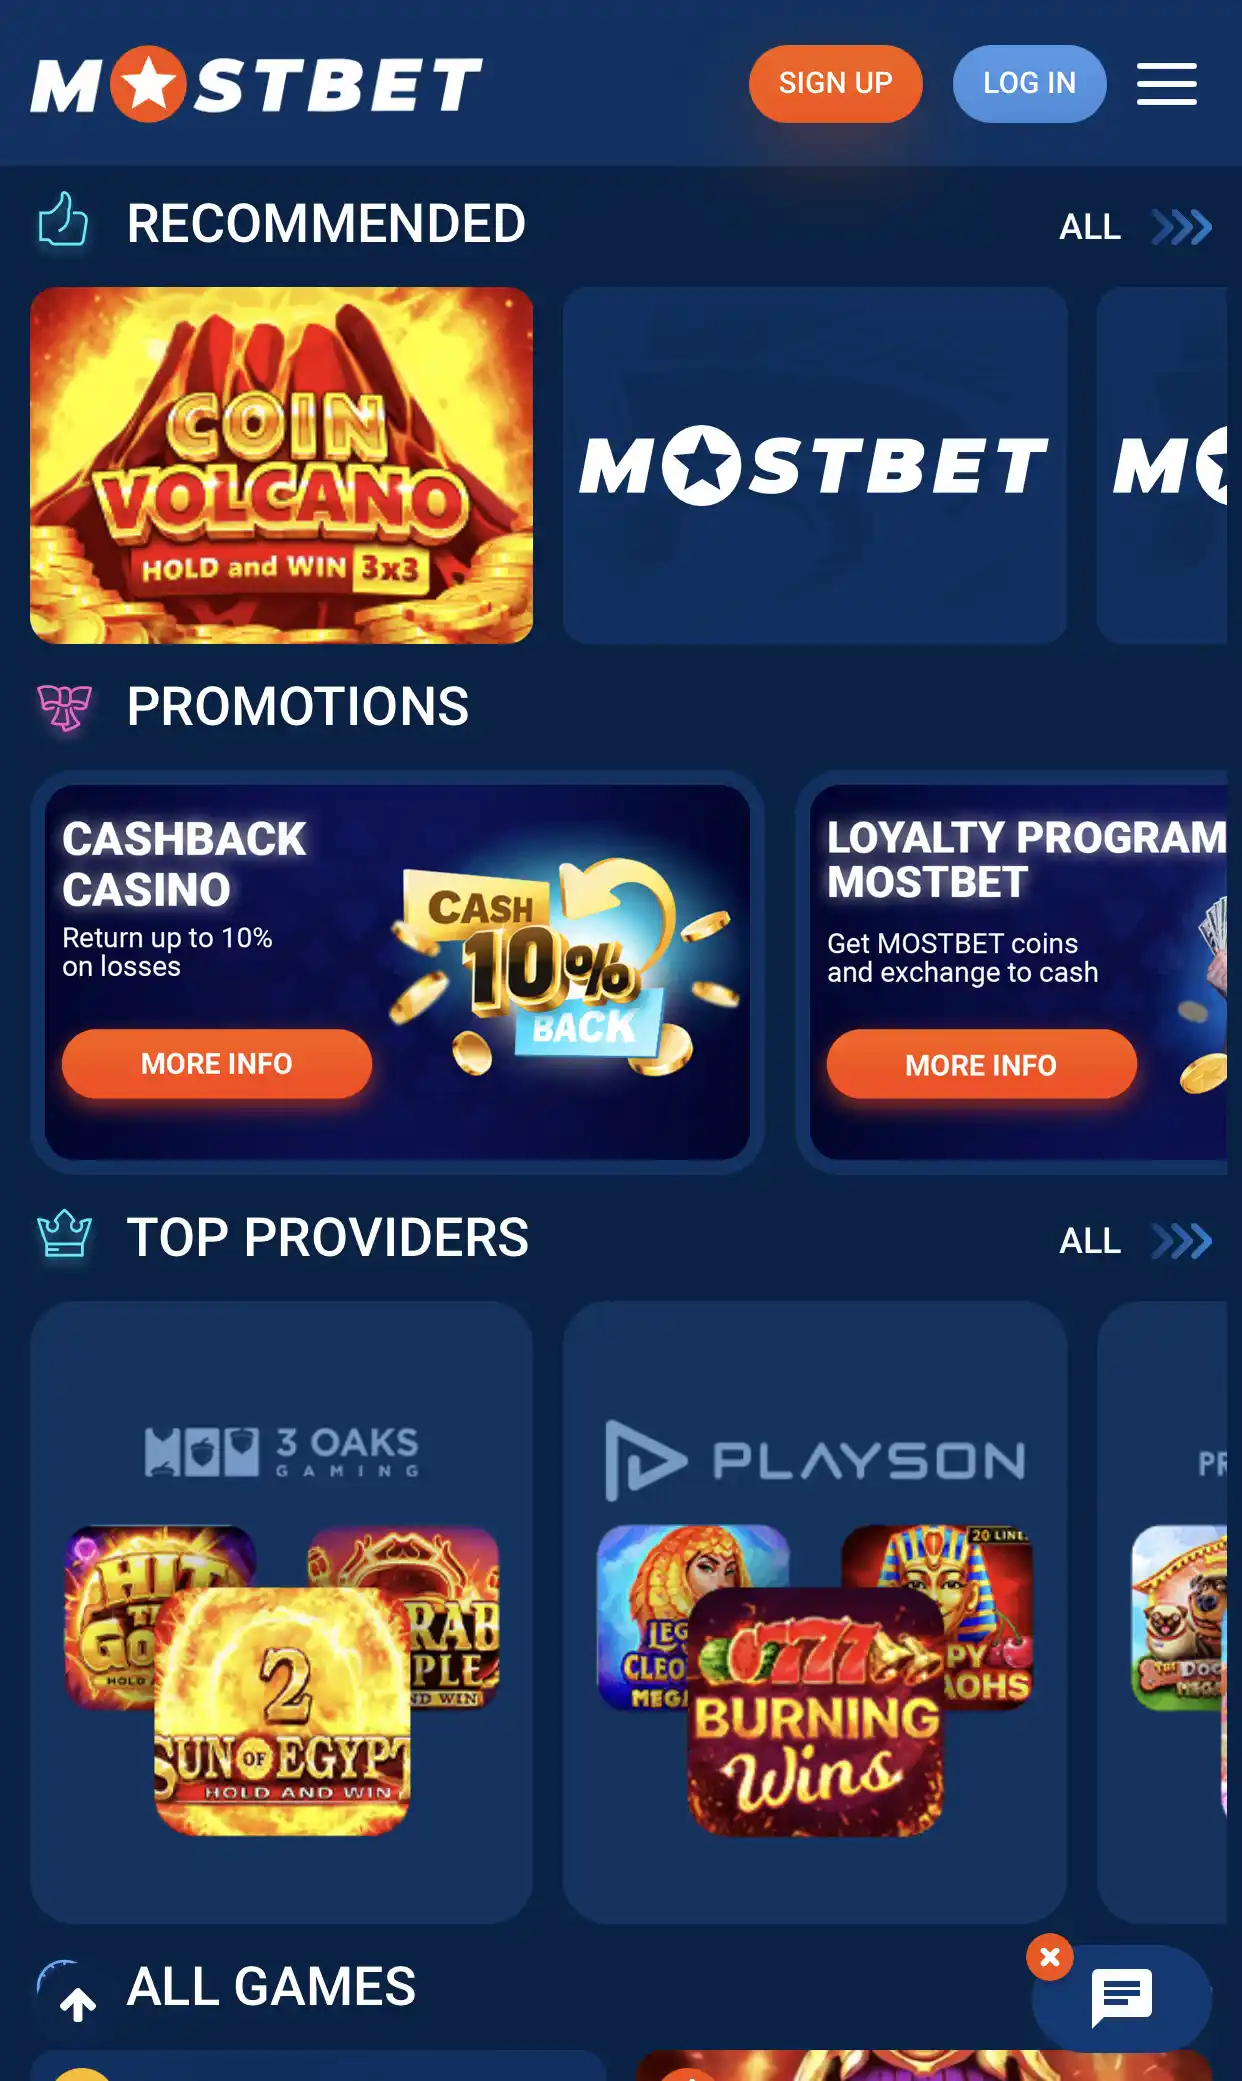 You can check out all the providers of Mostbet casino games.